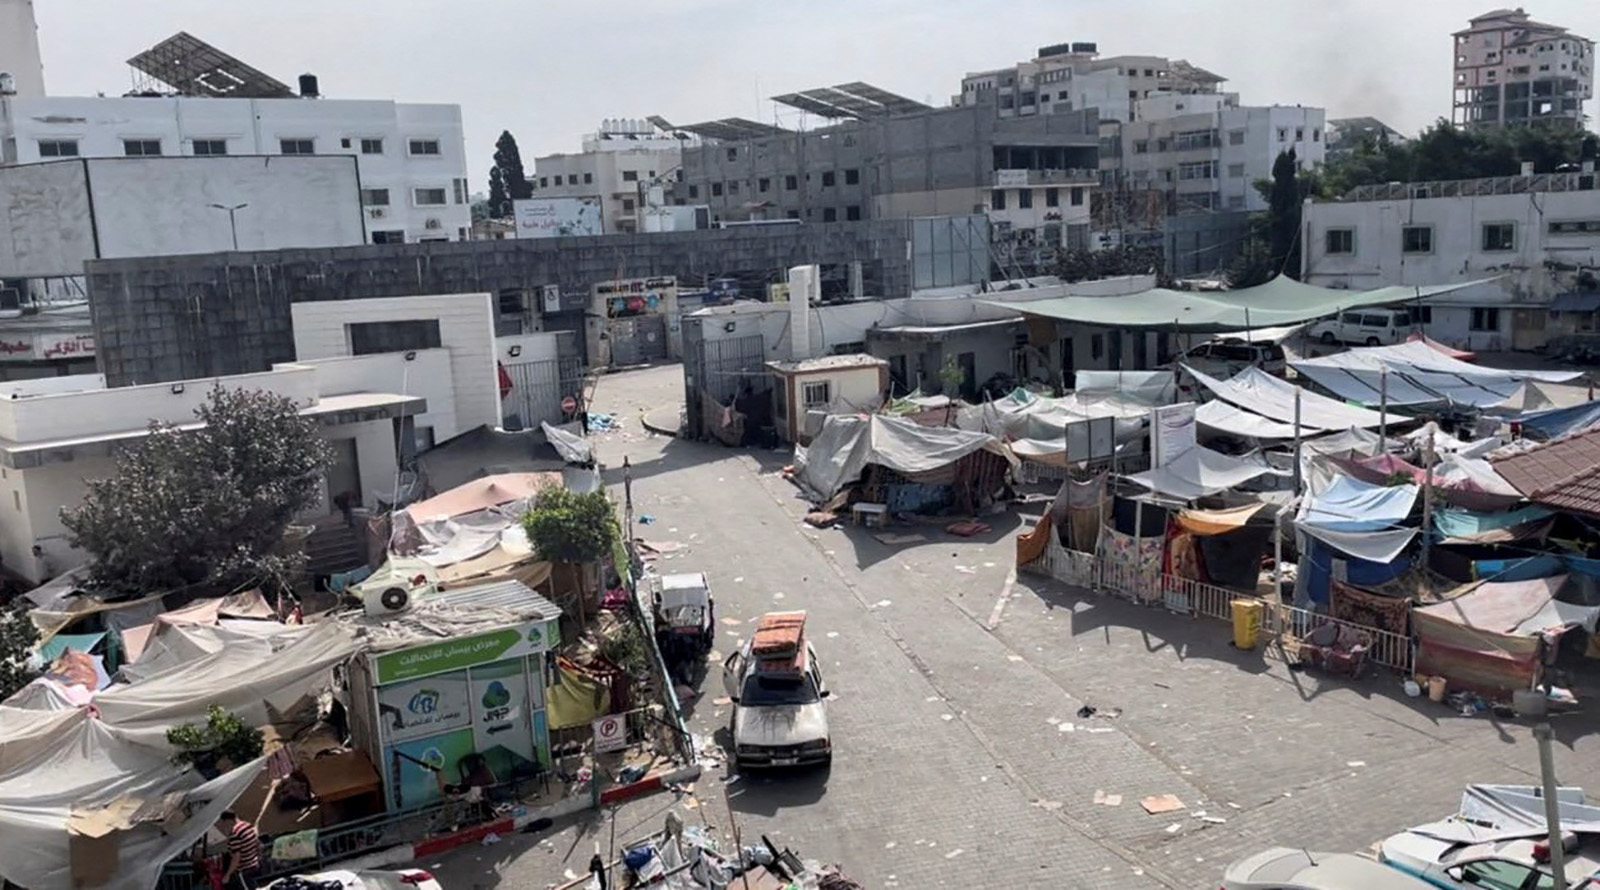 Tents and shelters in the yard of Al Shifa hospital in Gaza on November 12.